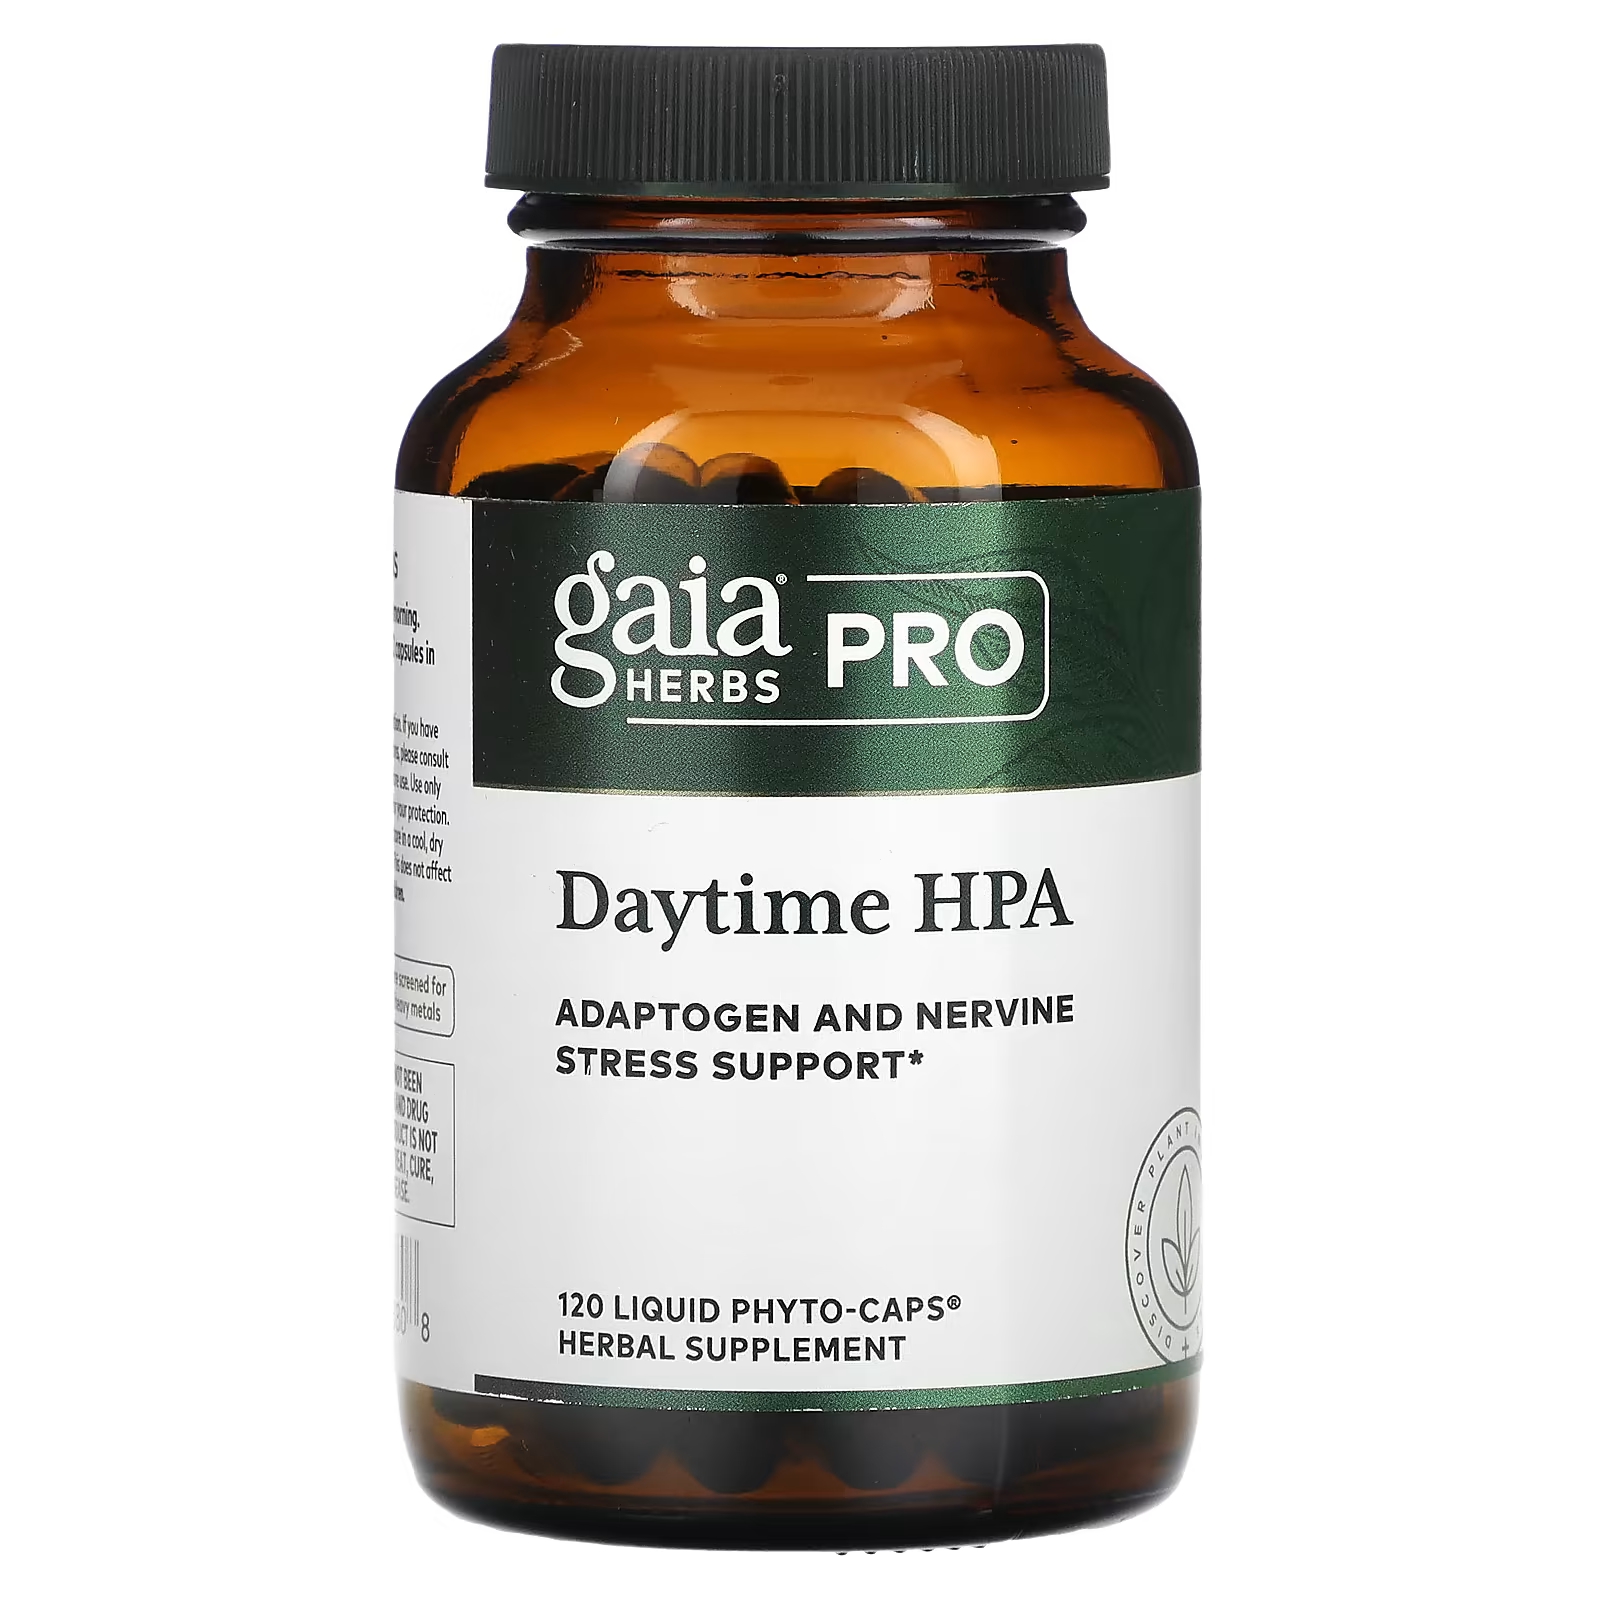 Gaia Herbs Professional Solutions Daytime HPA 120 капсул с жидким наполнением